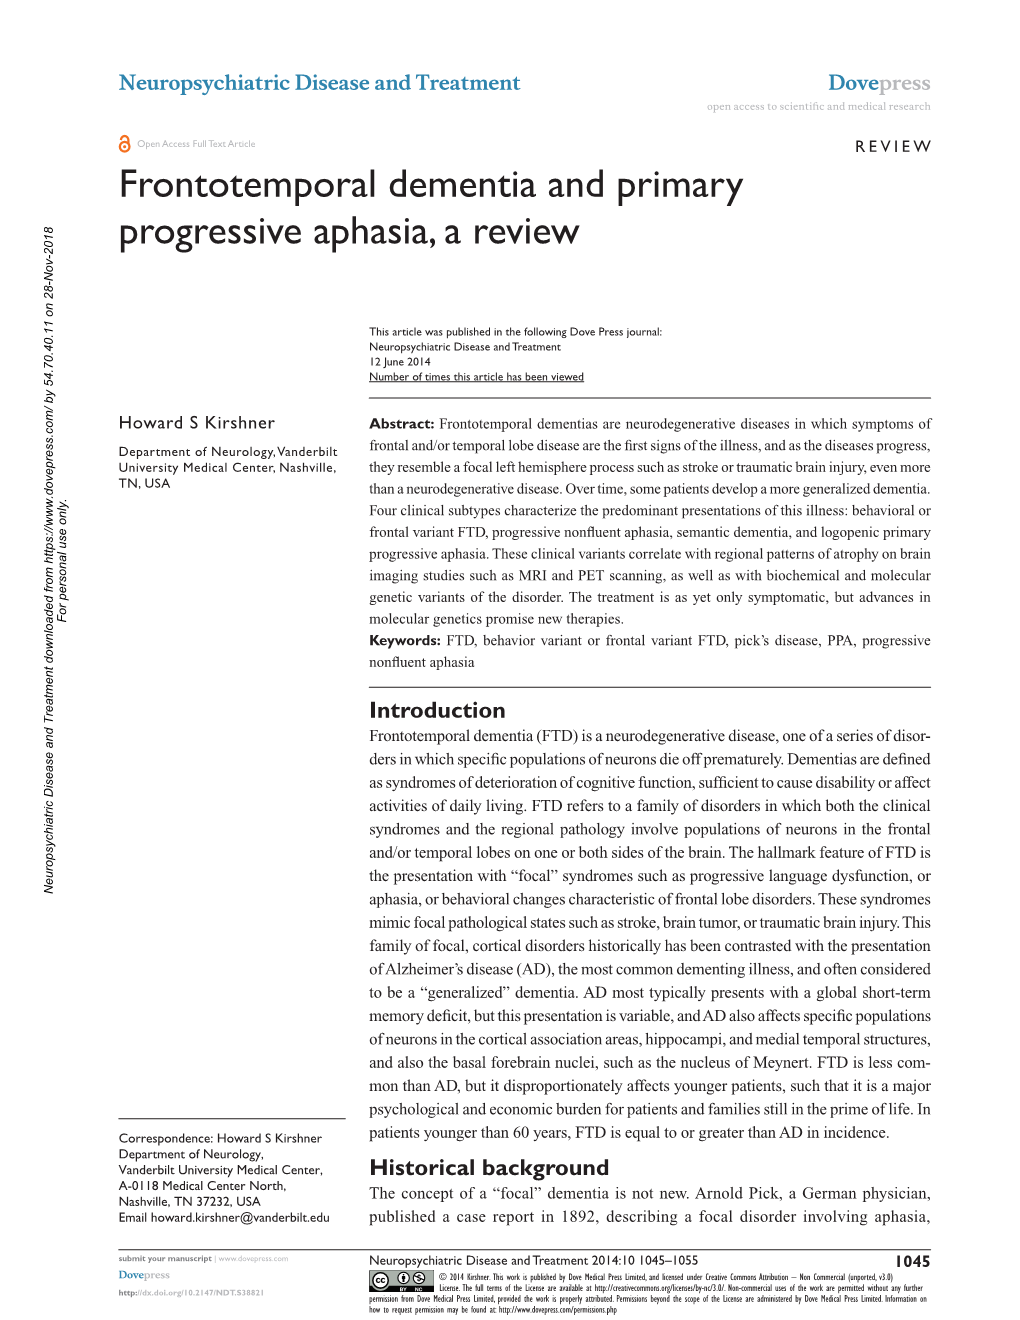 Frontotemporal Dementia and Primary Progressive Aphasia, a Review